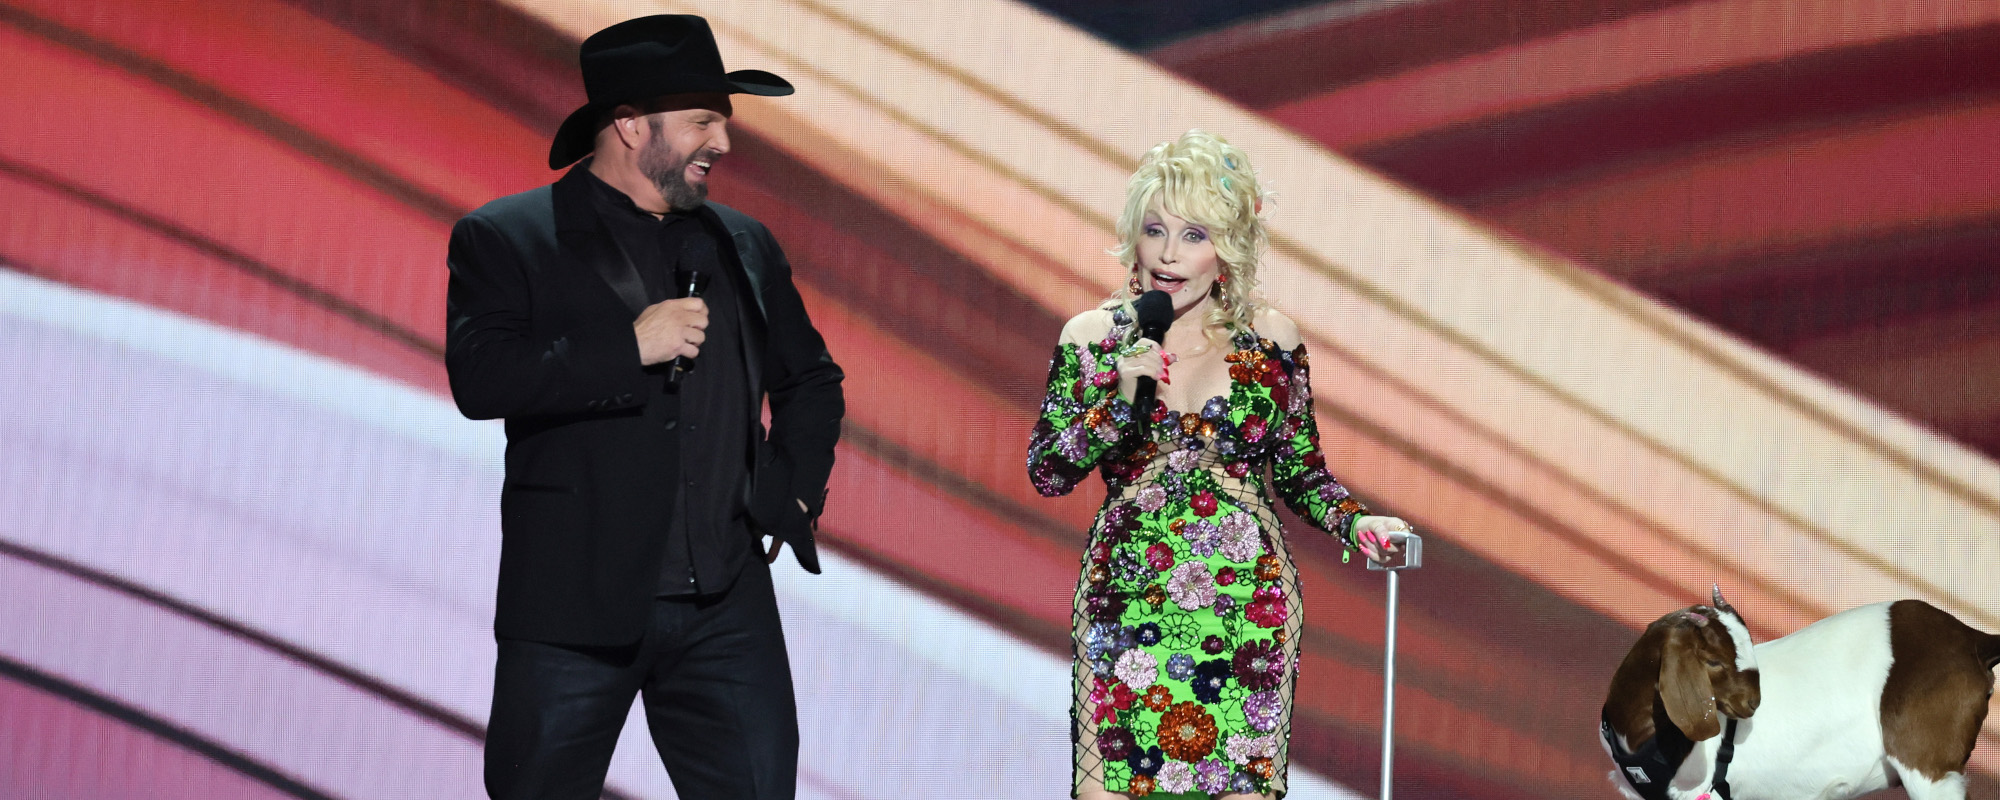 Dolly Parton Jokes About “Threesomes” and Brings Out an Actual Goat During the ACM Awards